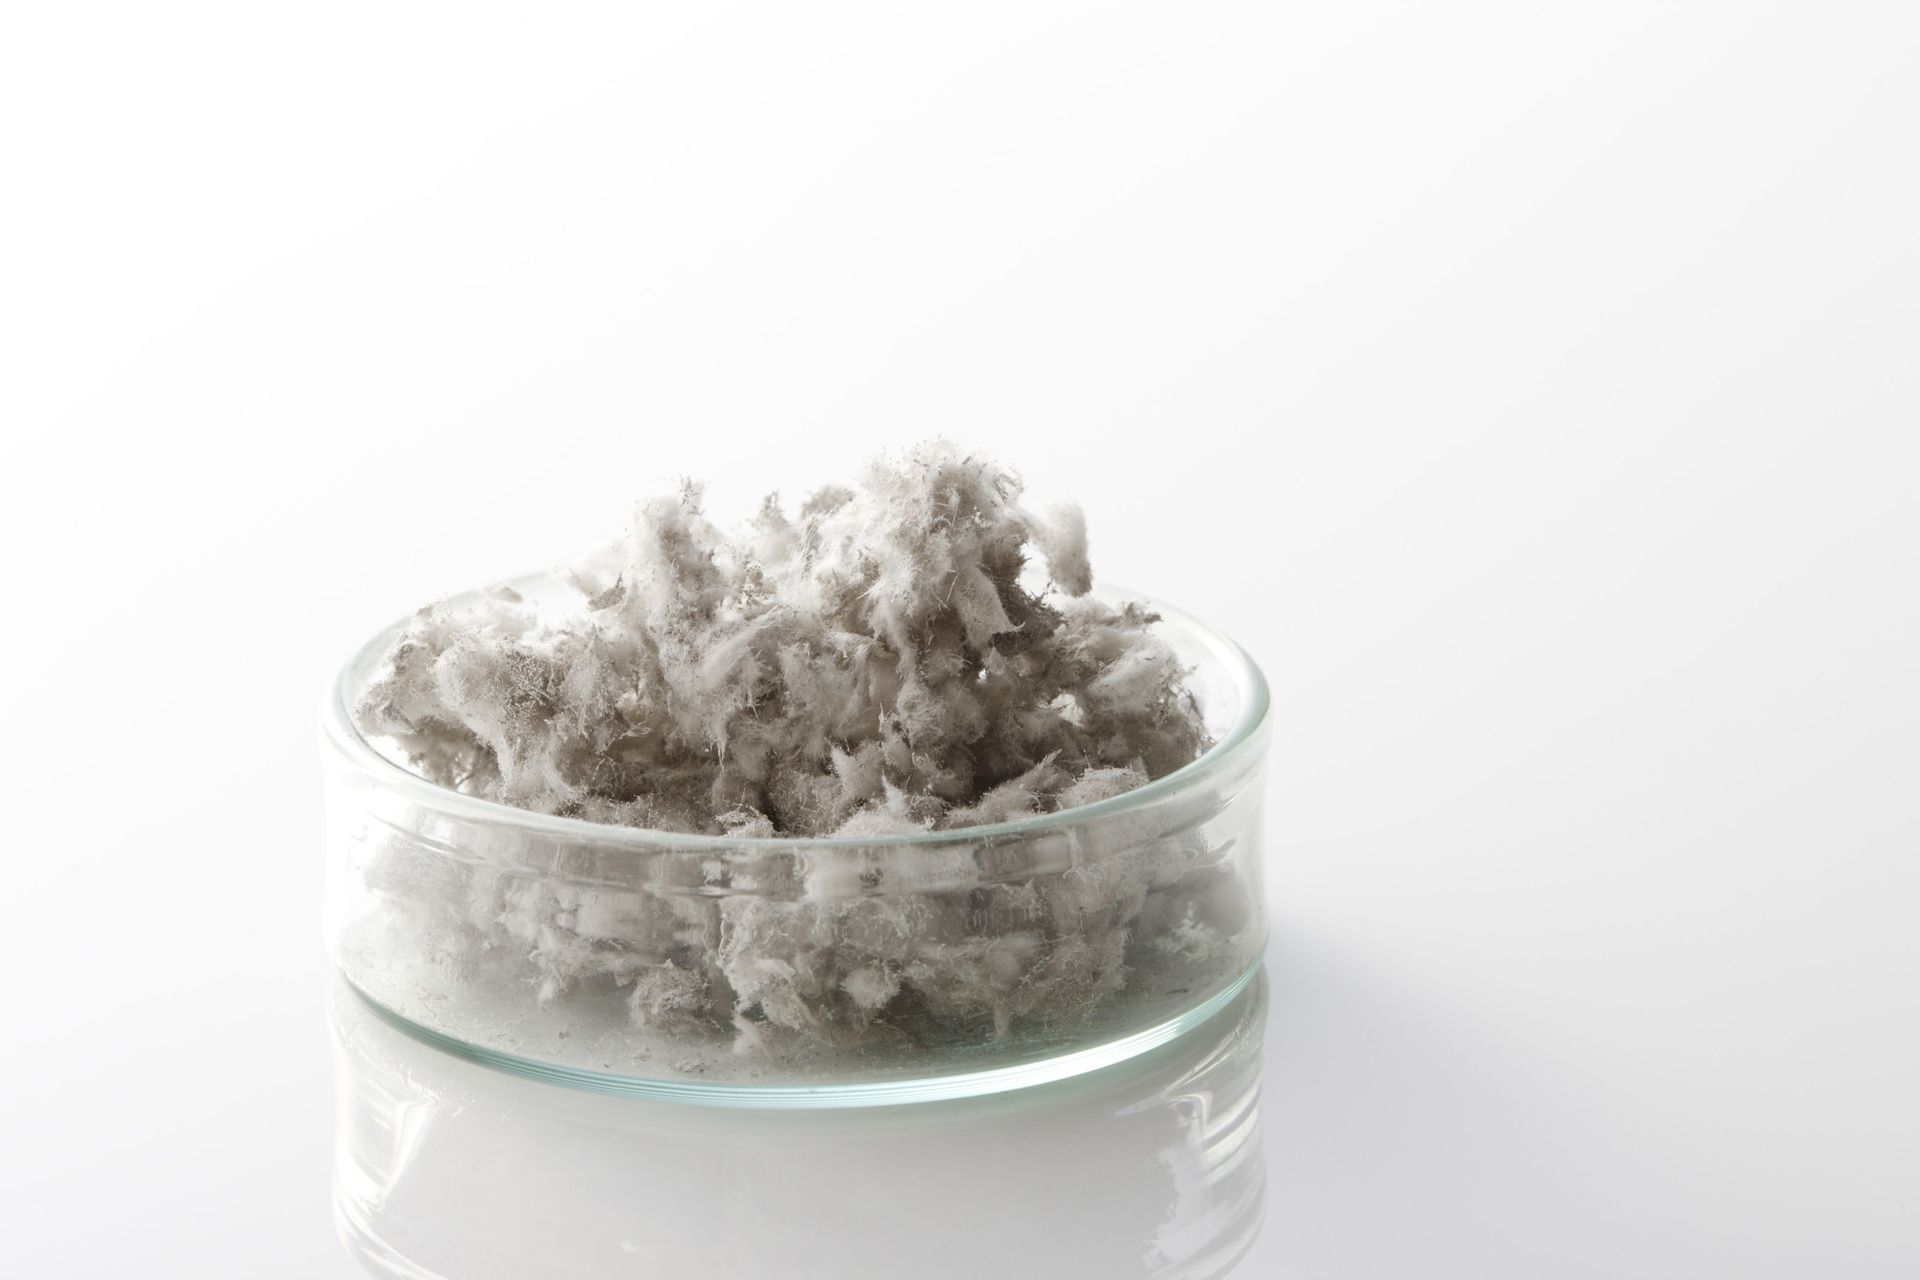 Asbestos in a glass dish in a laboratory